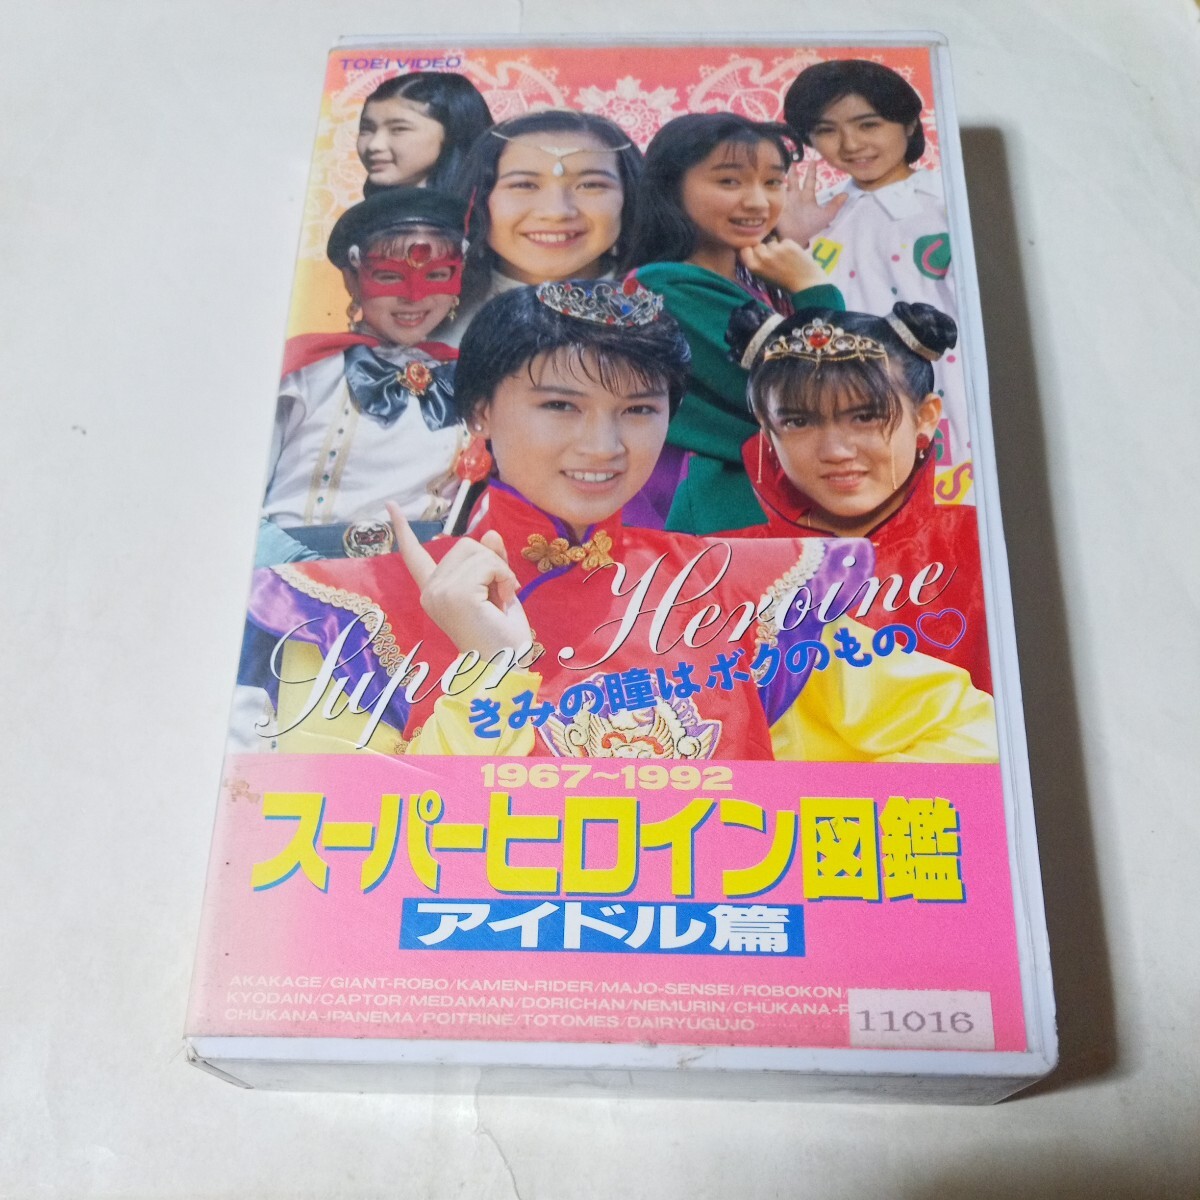 VHS video super heroine illustrated reference book idol compilation compilation work *powato Lynn,na il .toto female,.........,.... not ... other 